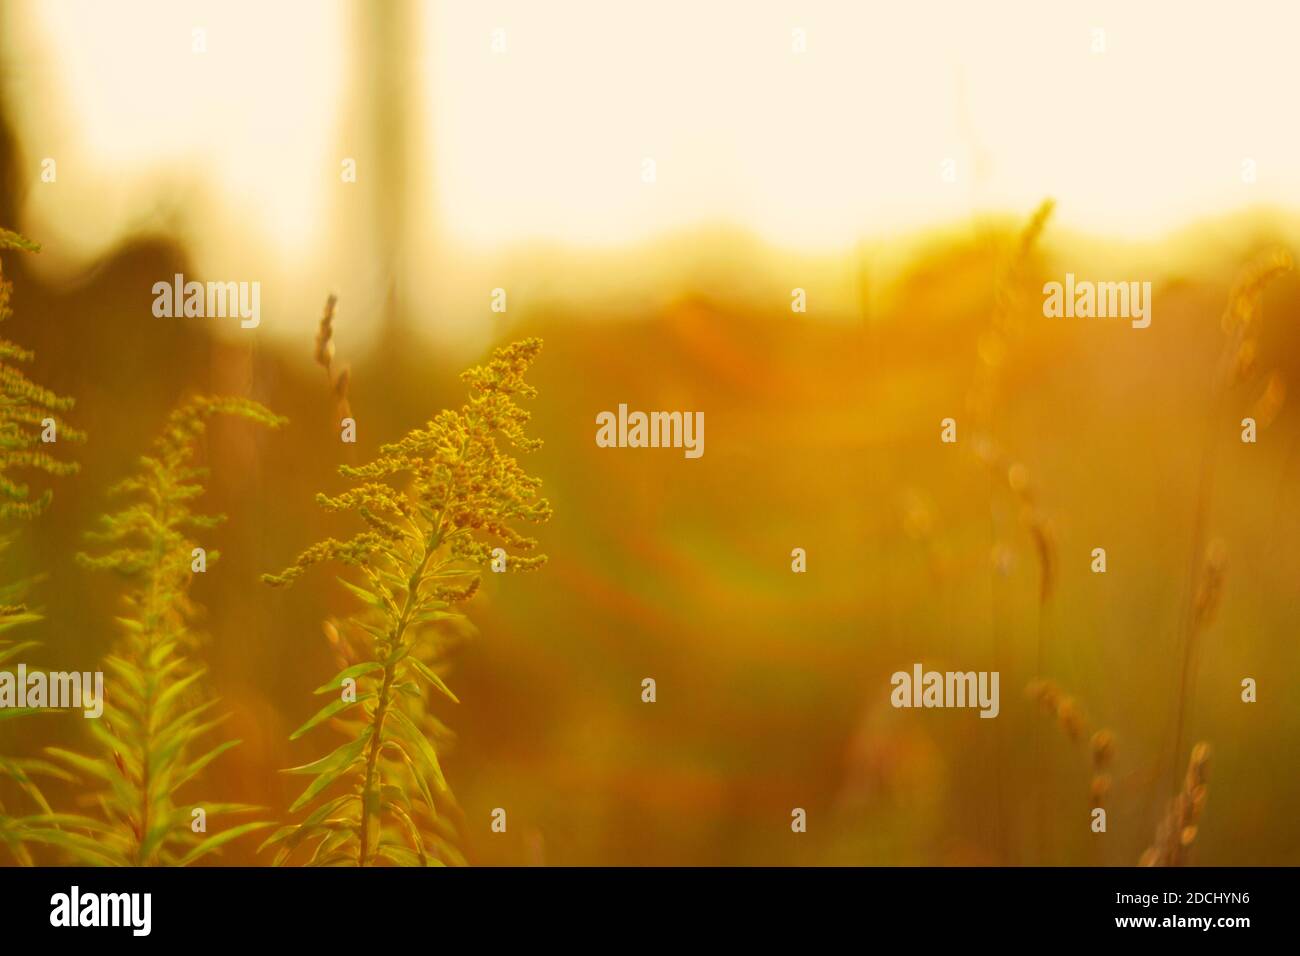 Blooming goldenrod (Solidago altissima) in sunset with low dof, soft focus Stock Photo